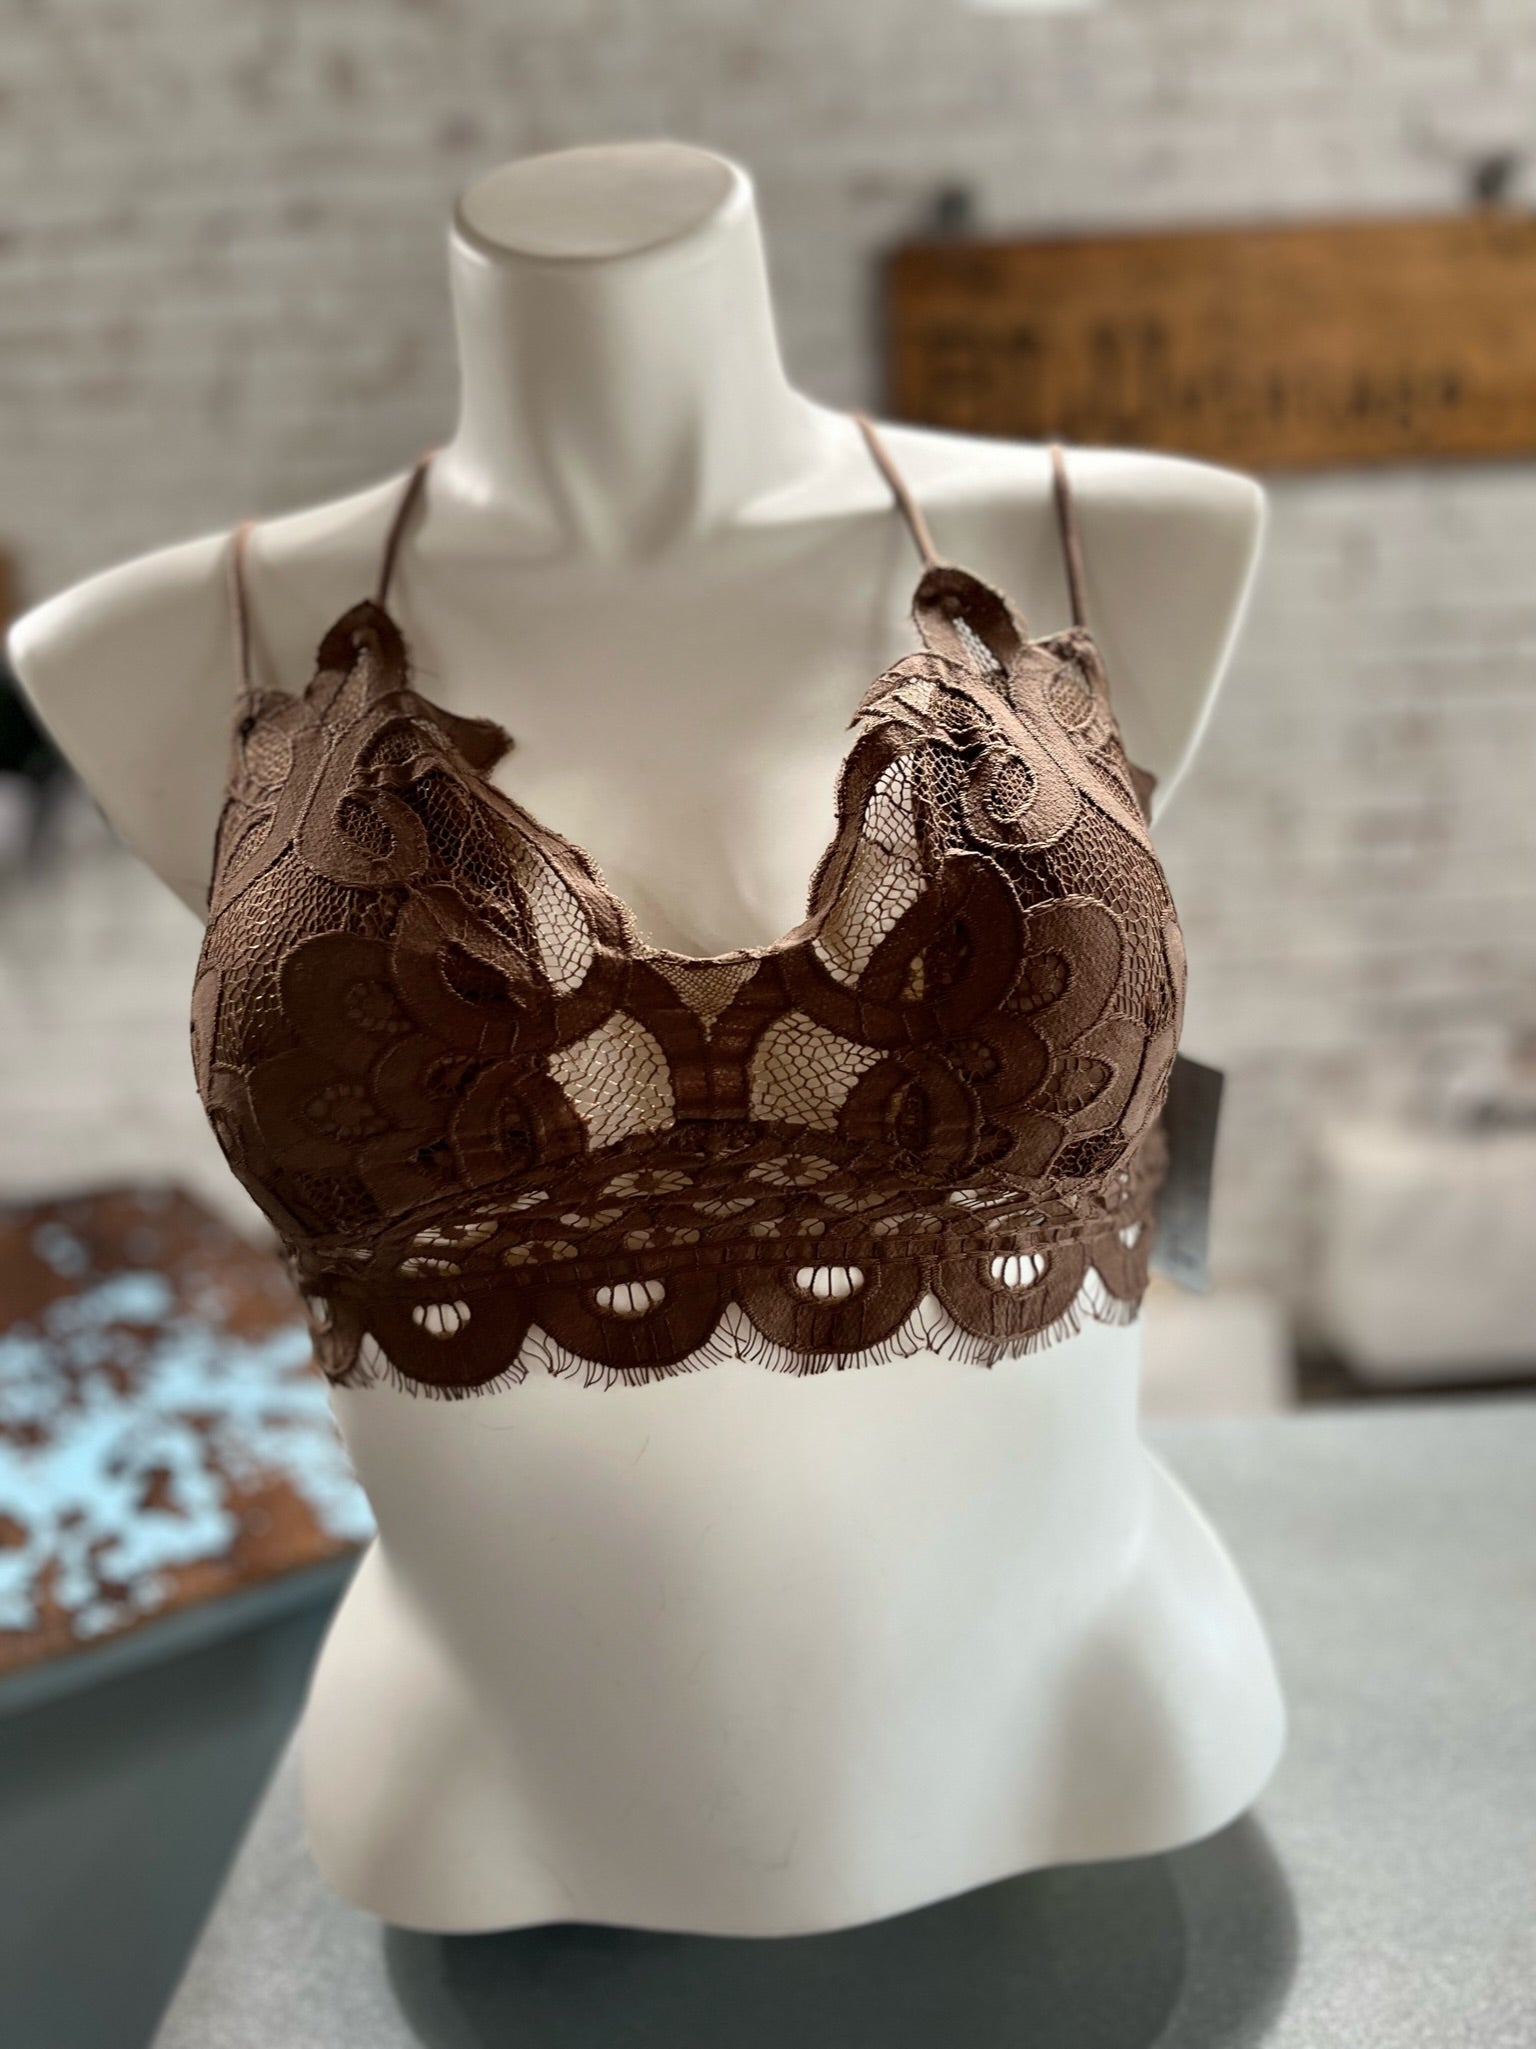 Opening Day Bralette, Cocoa